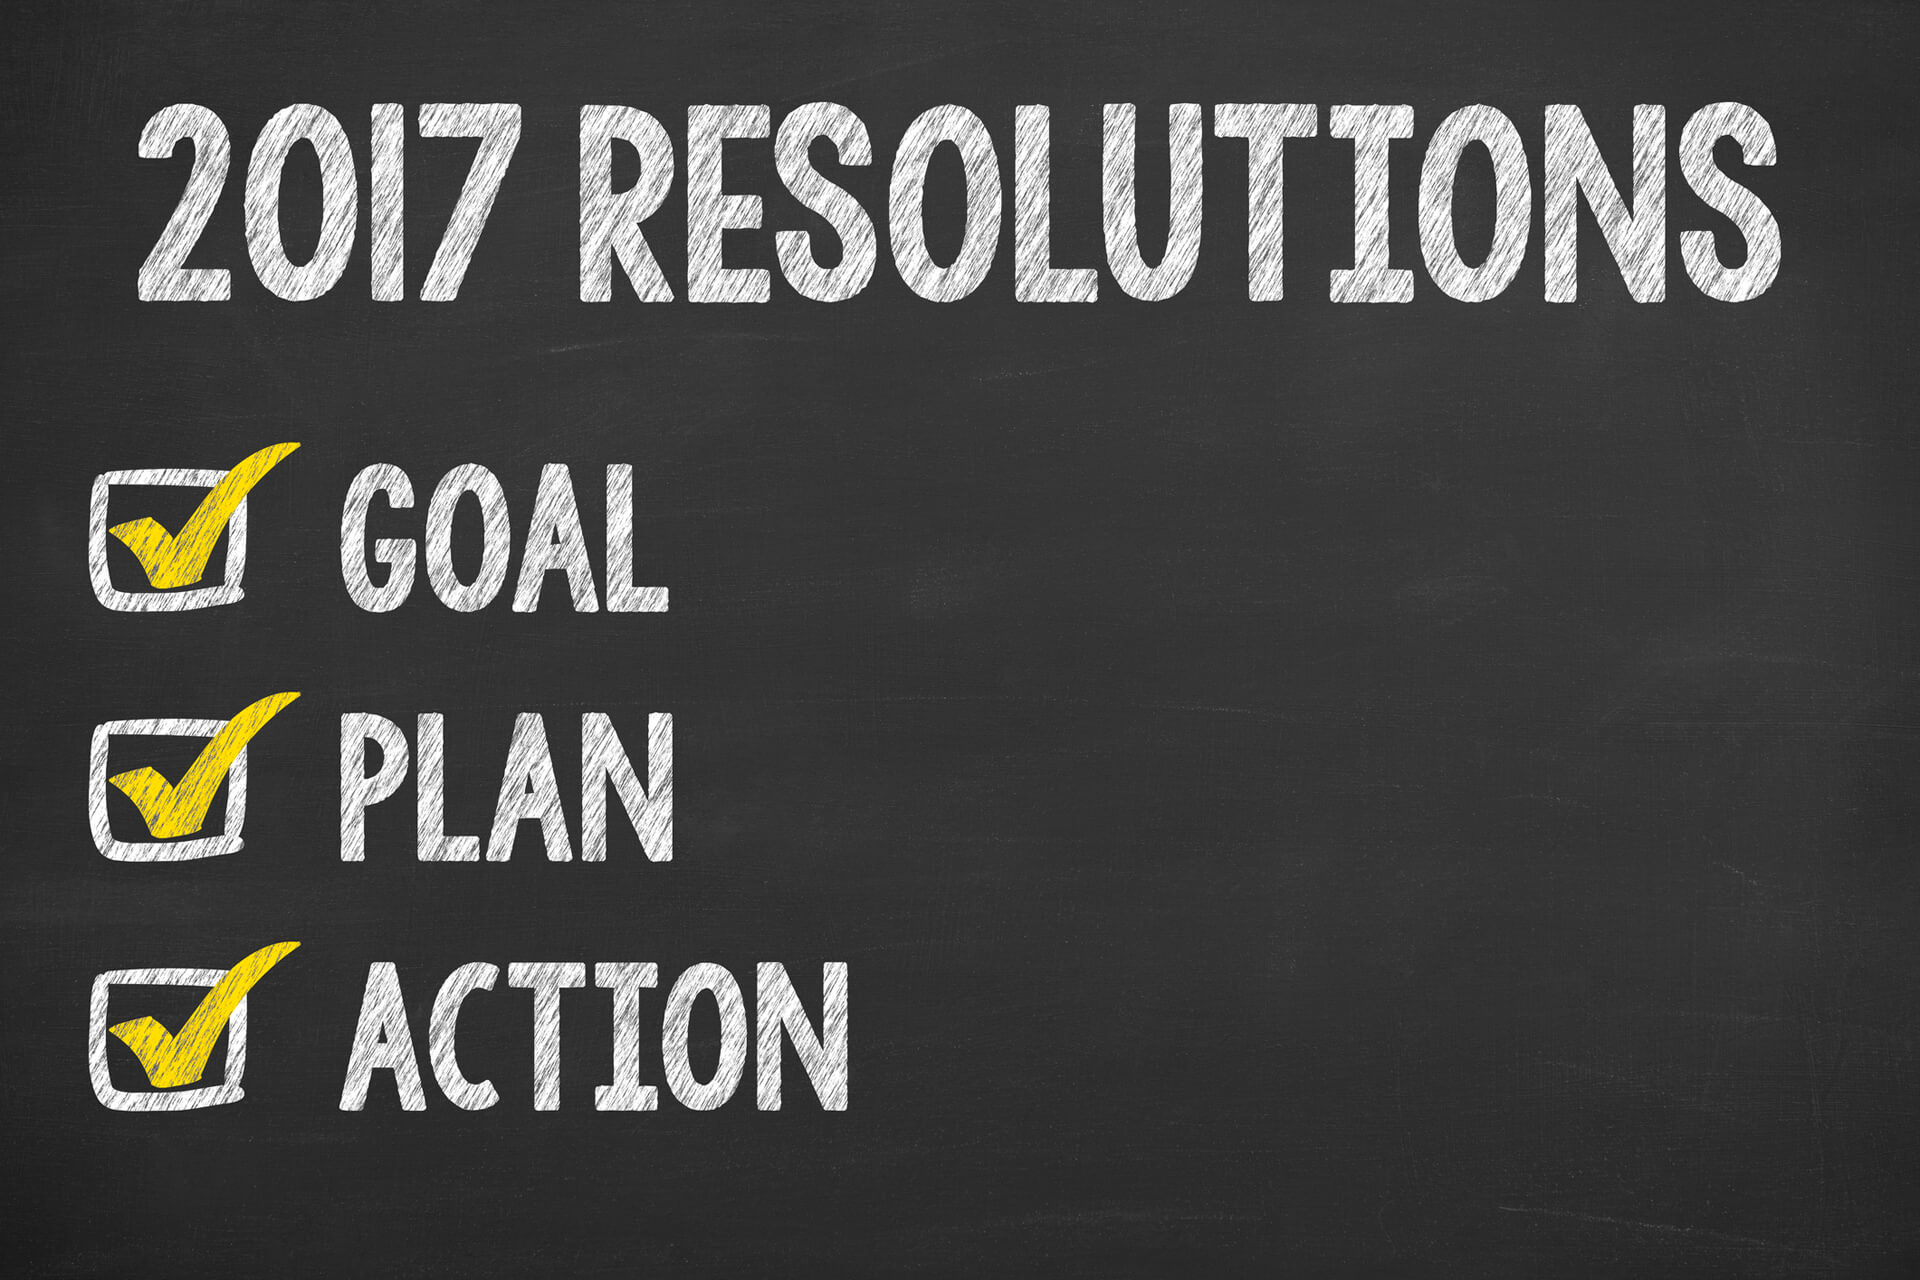 2017 New Years resolutions